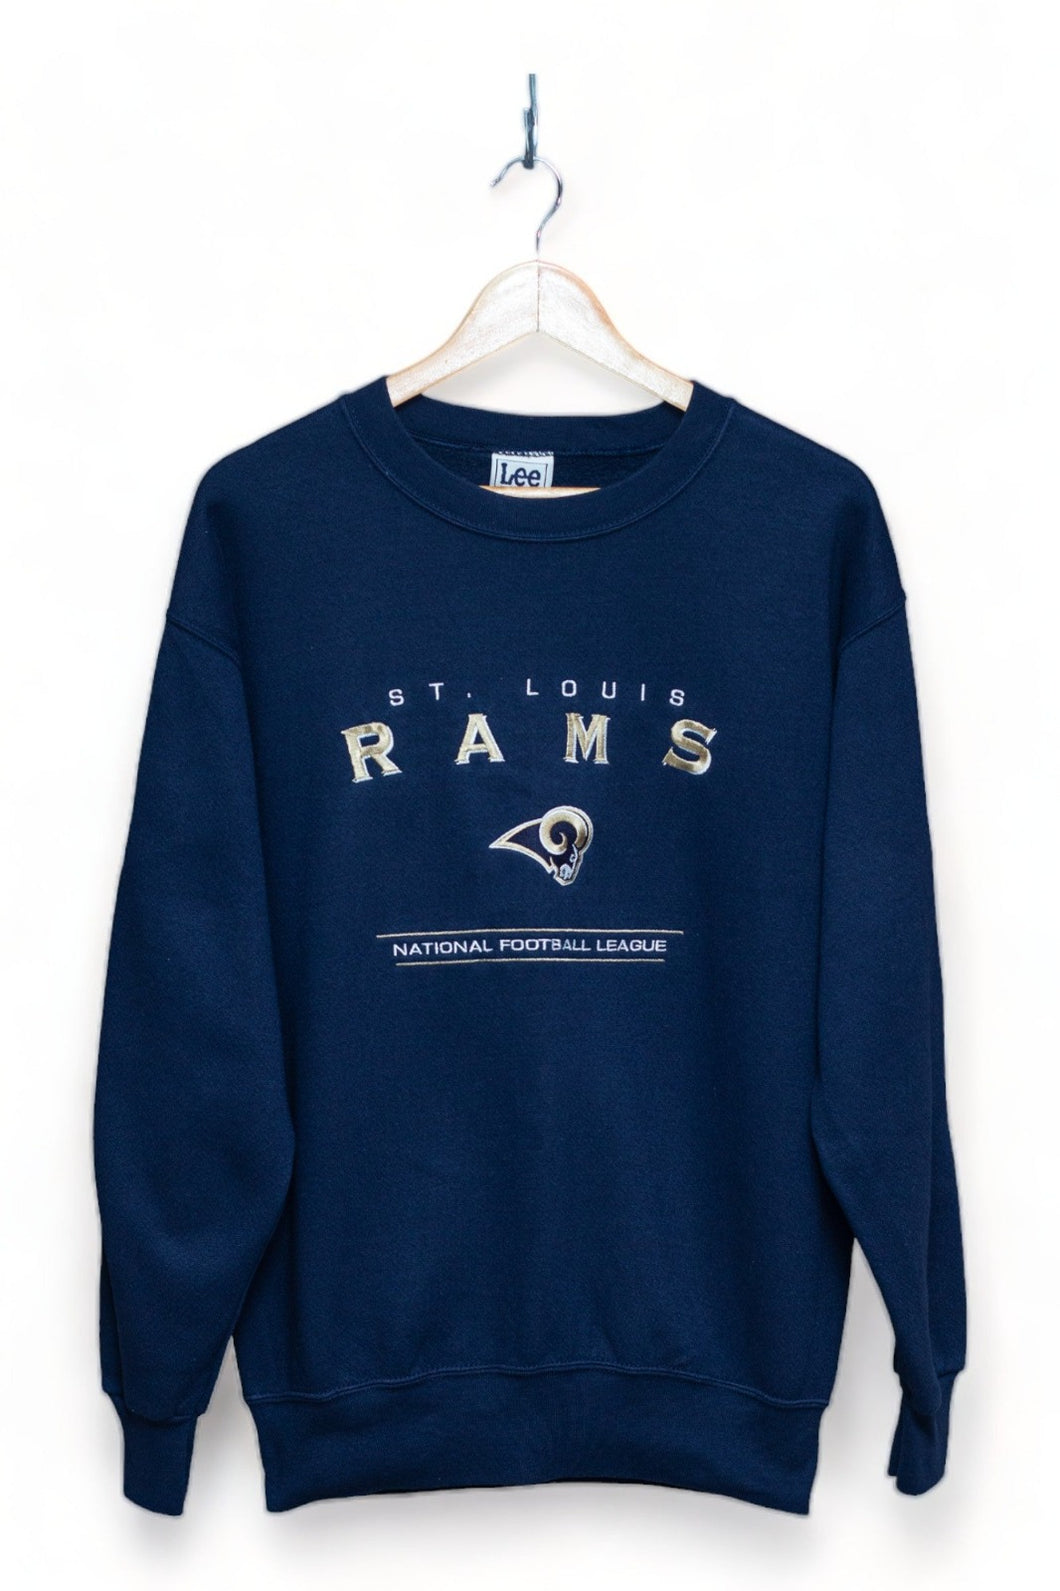 St Louis Rams - Embroidered Spell Out Sweater (M)